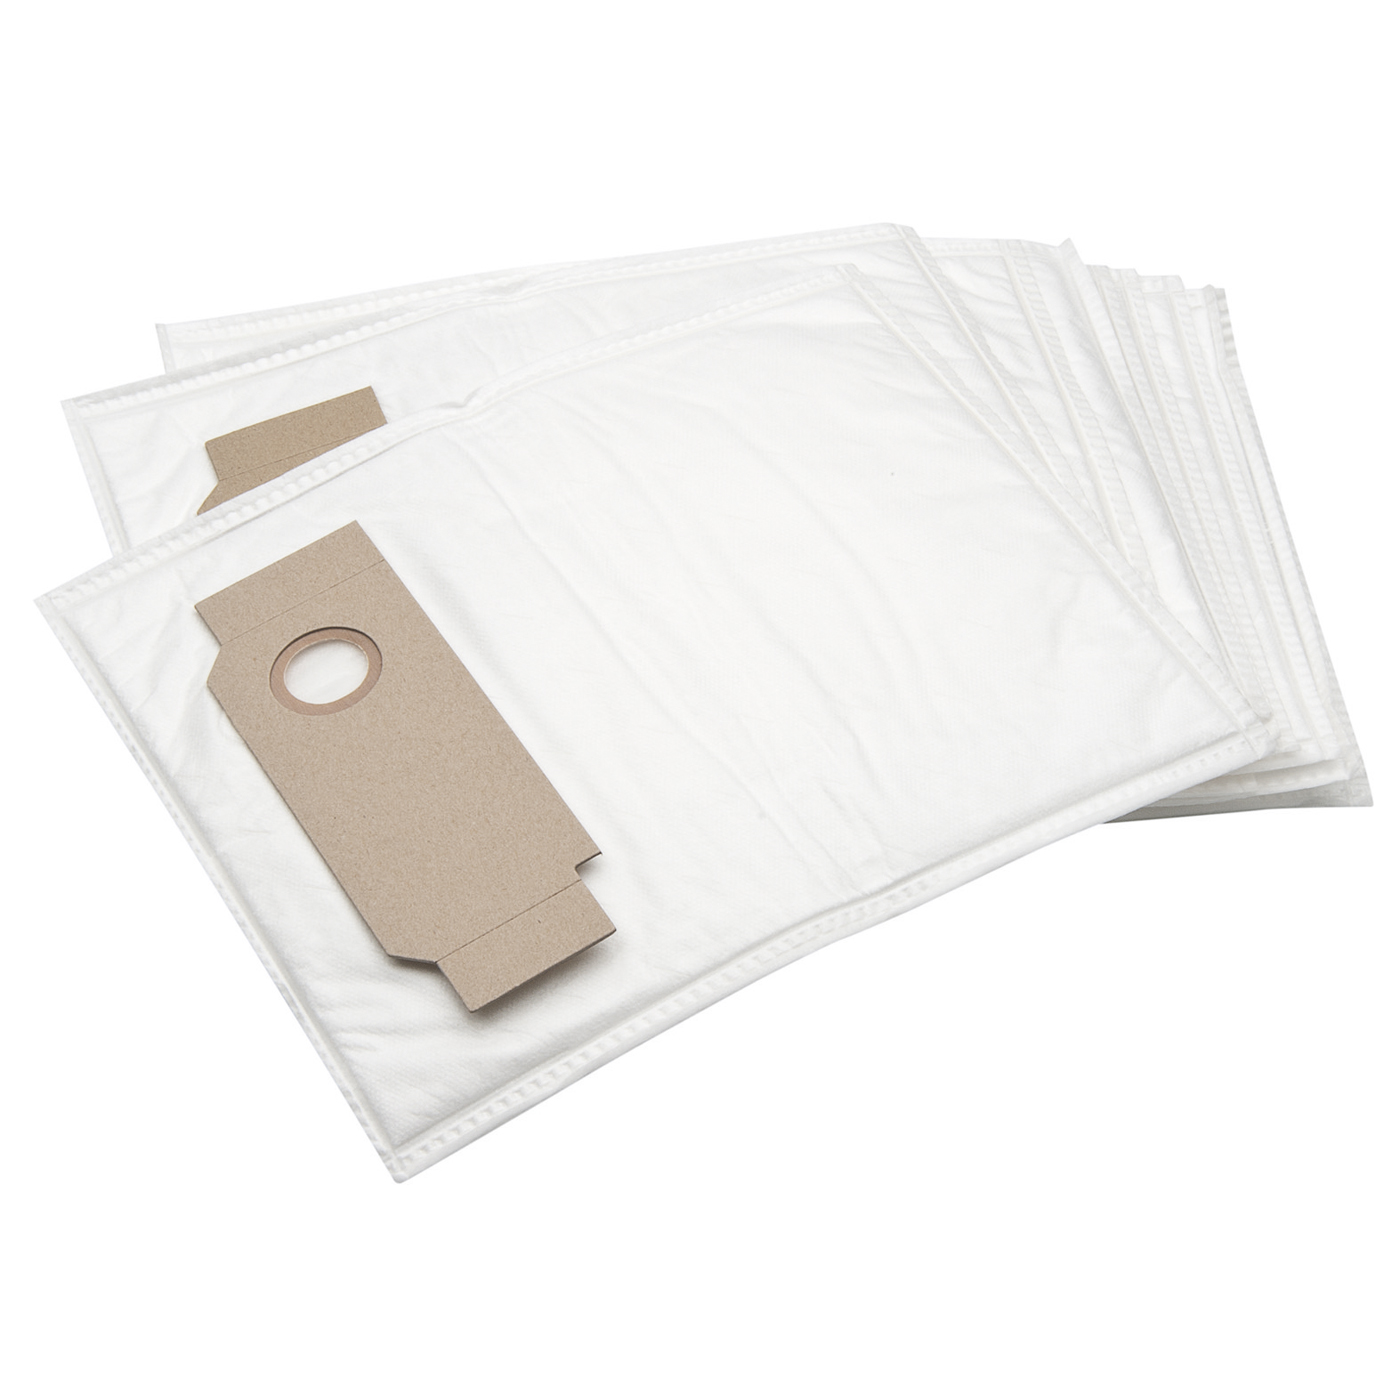 Filter Bags, for Mini Extractions - 10 pieces